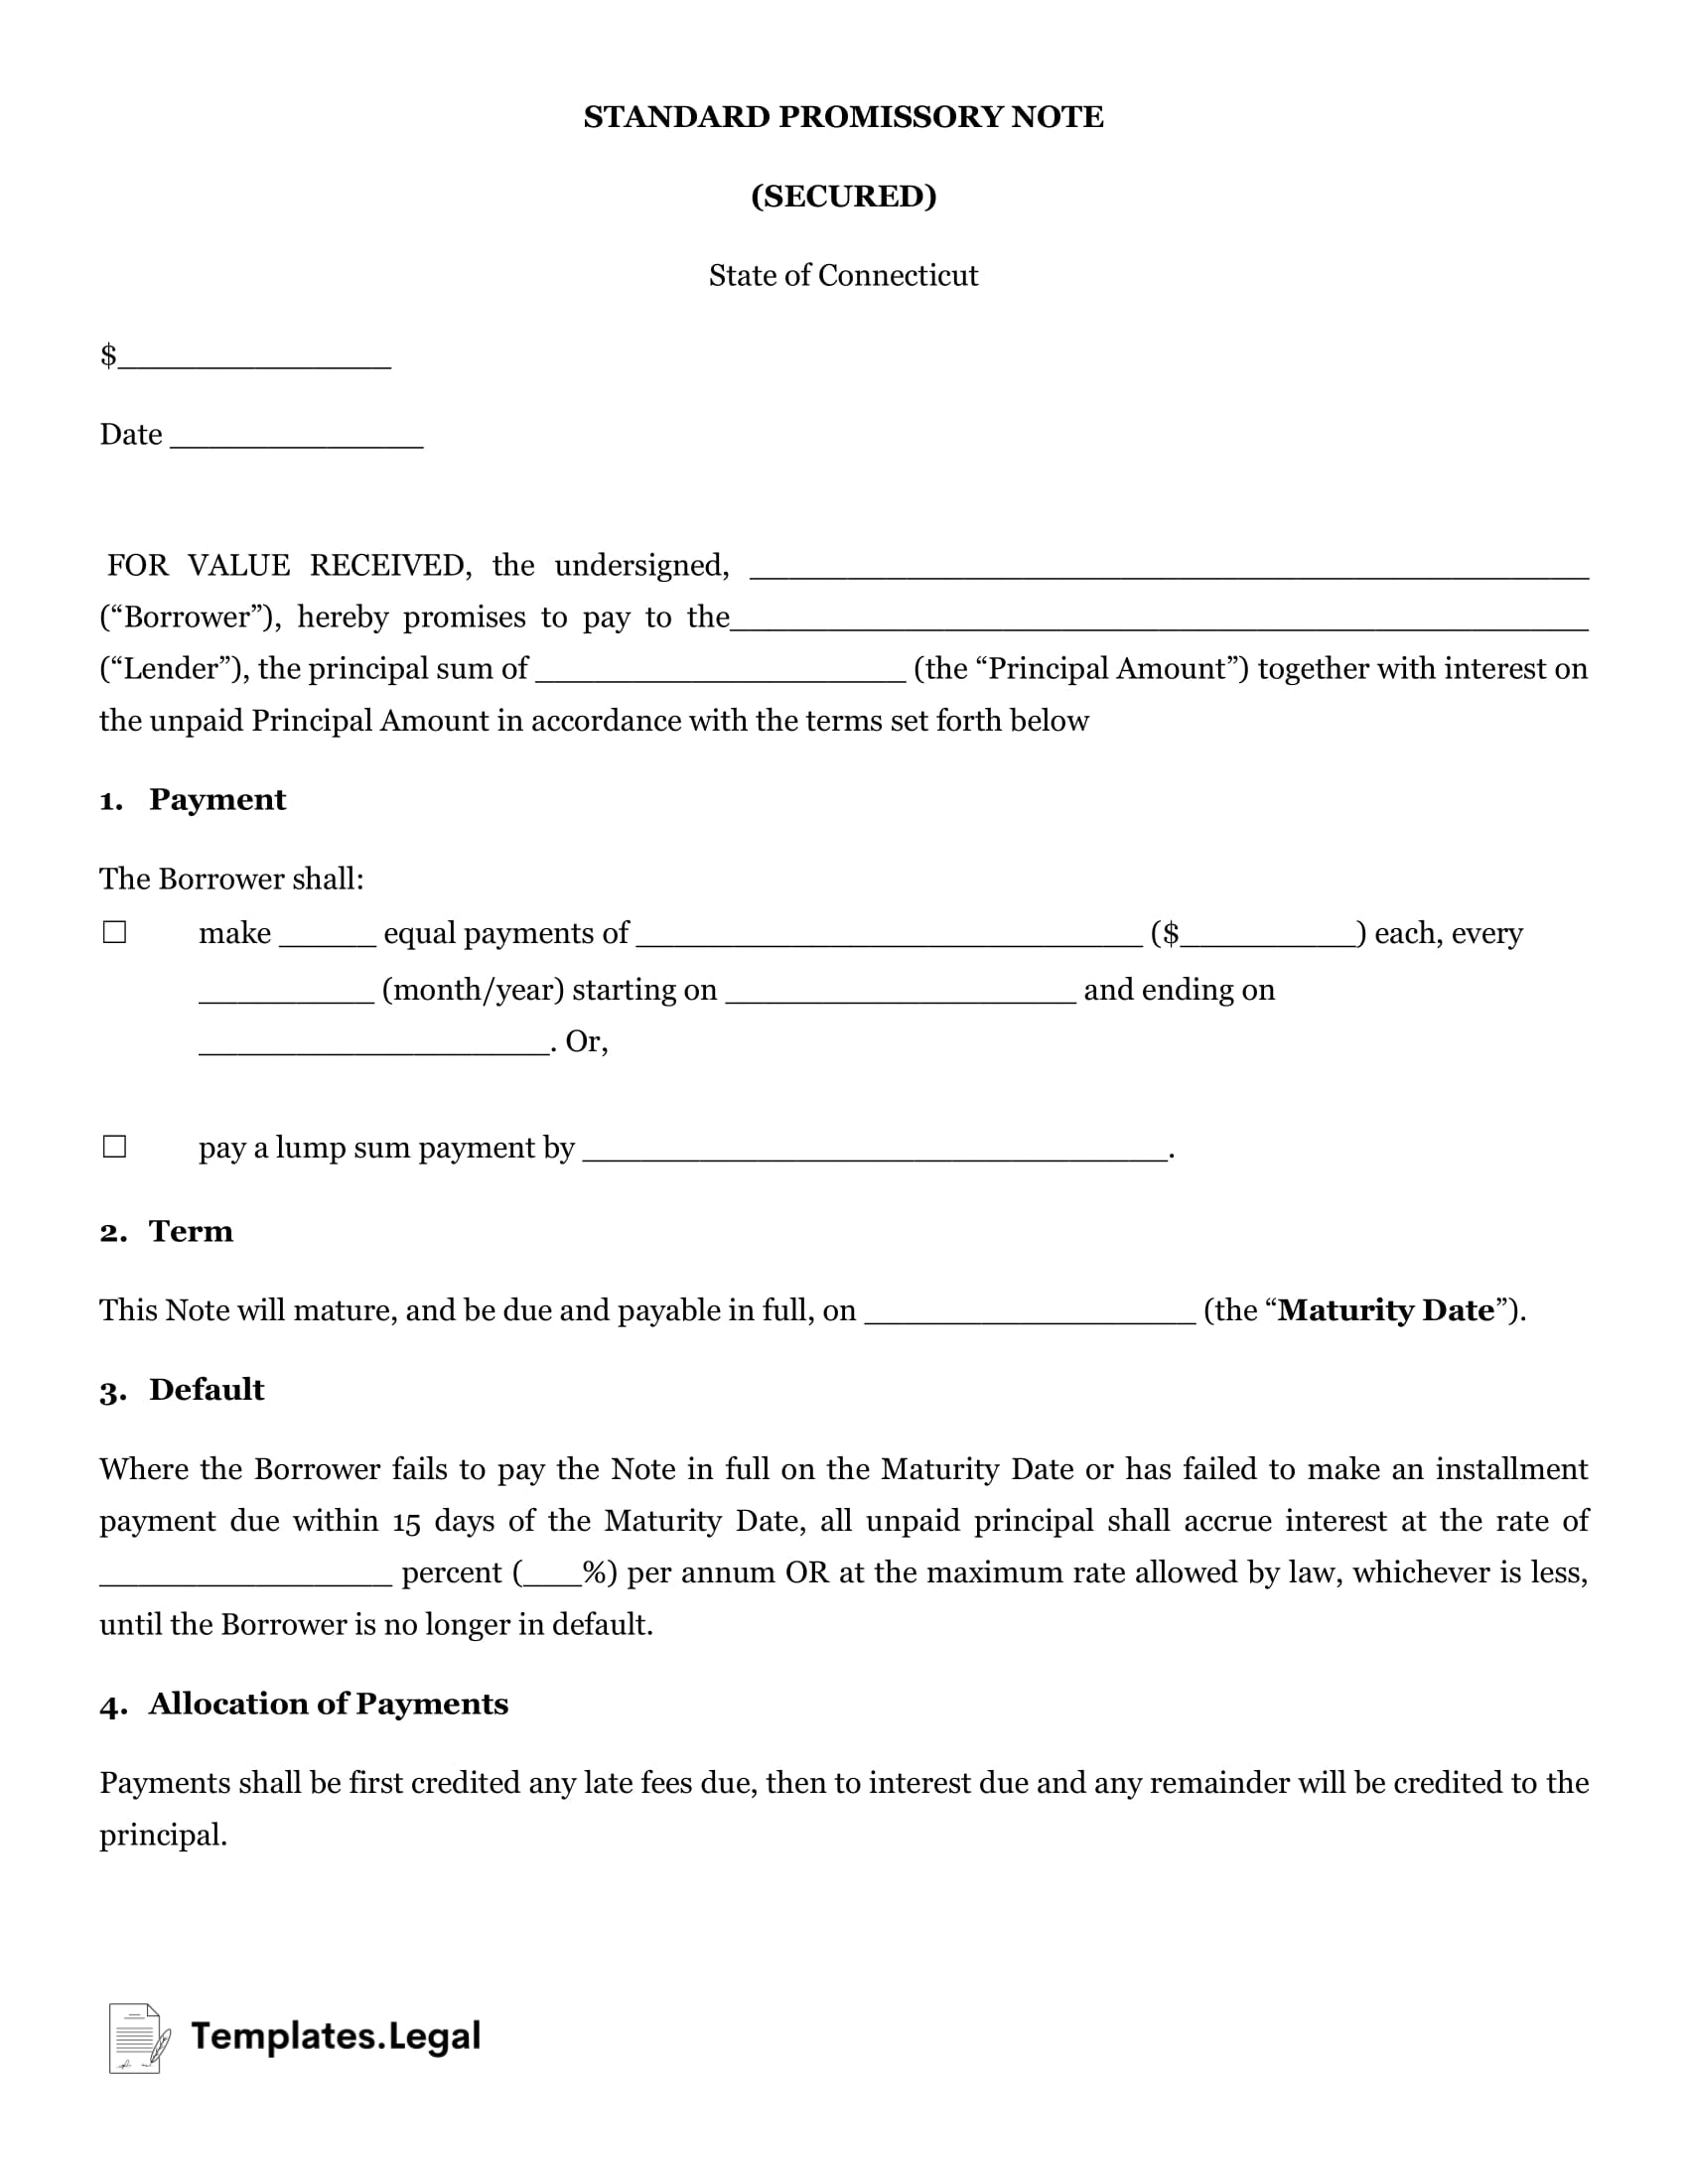 Connecticut Secured Promissory Note - Templates.Legal